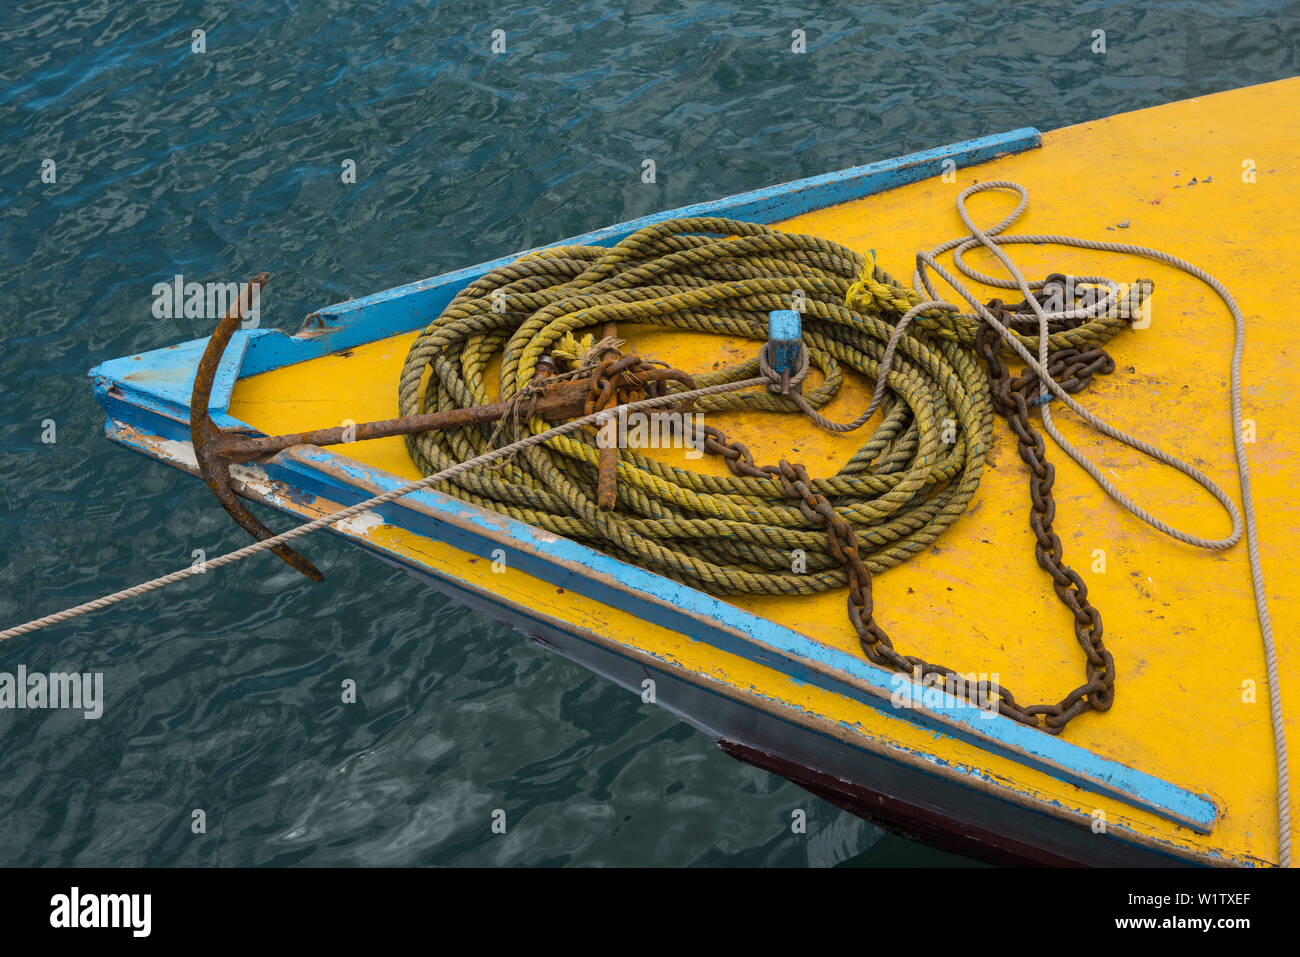 A yellow and blue bow of a small ship is strewn with yellow rope attached to a rusty chain and anchor, Lautoka, Viti Levu, Fiji, South Pacific Stock Photo